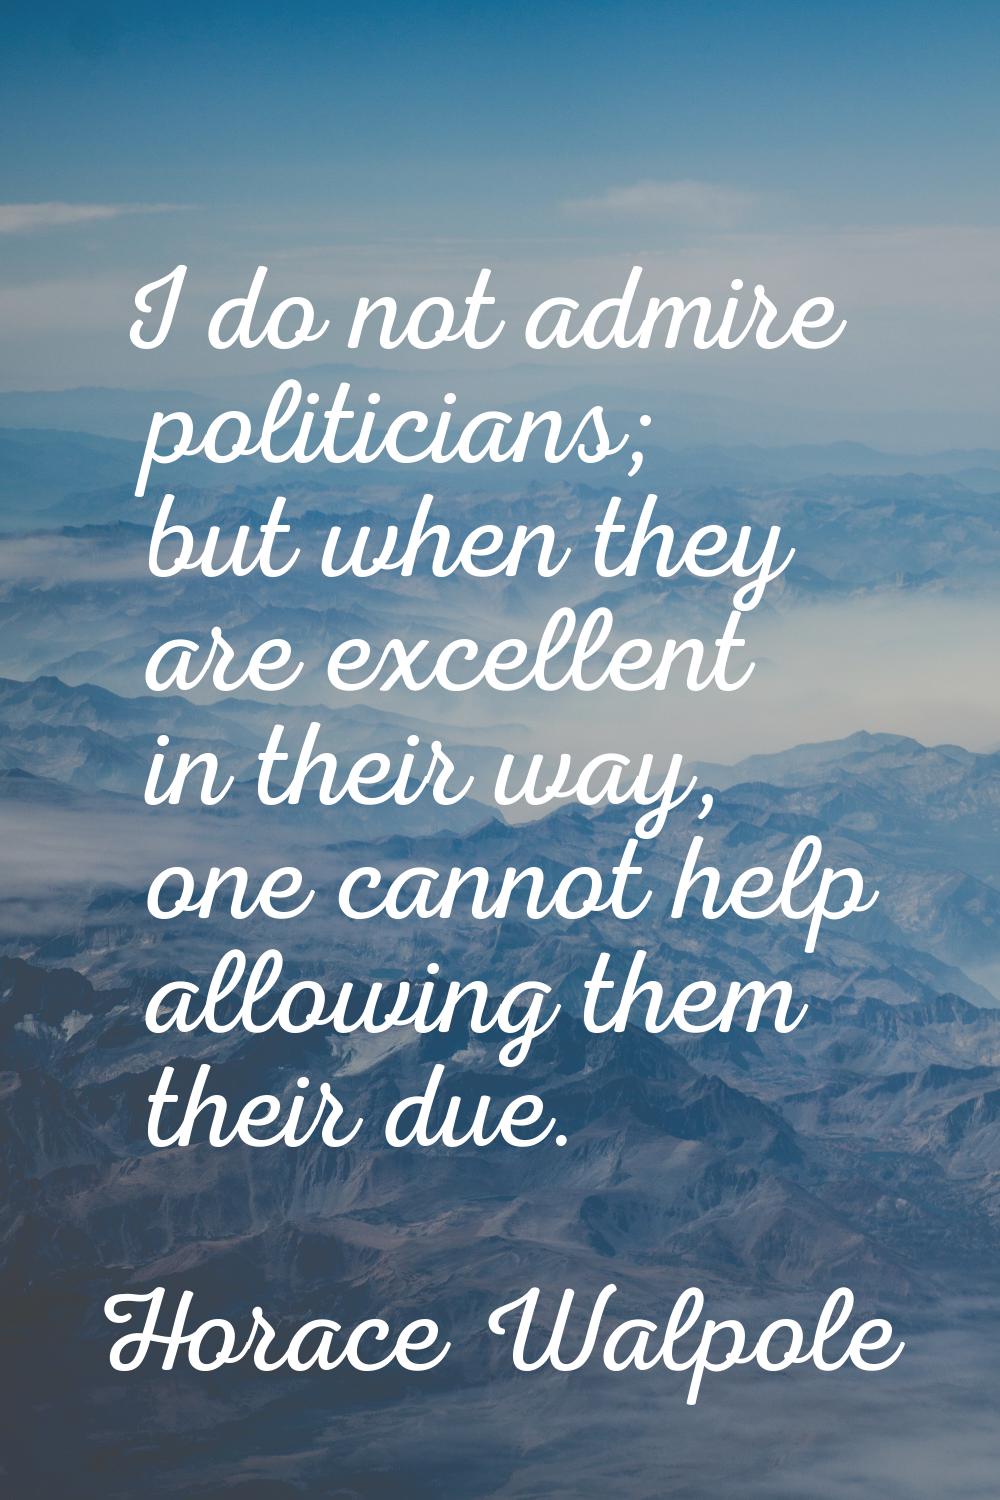 I do not admire politicians; but when they are excellent in their way, one cannot help allowing the